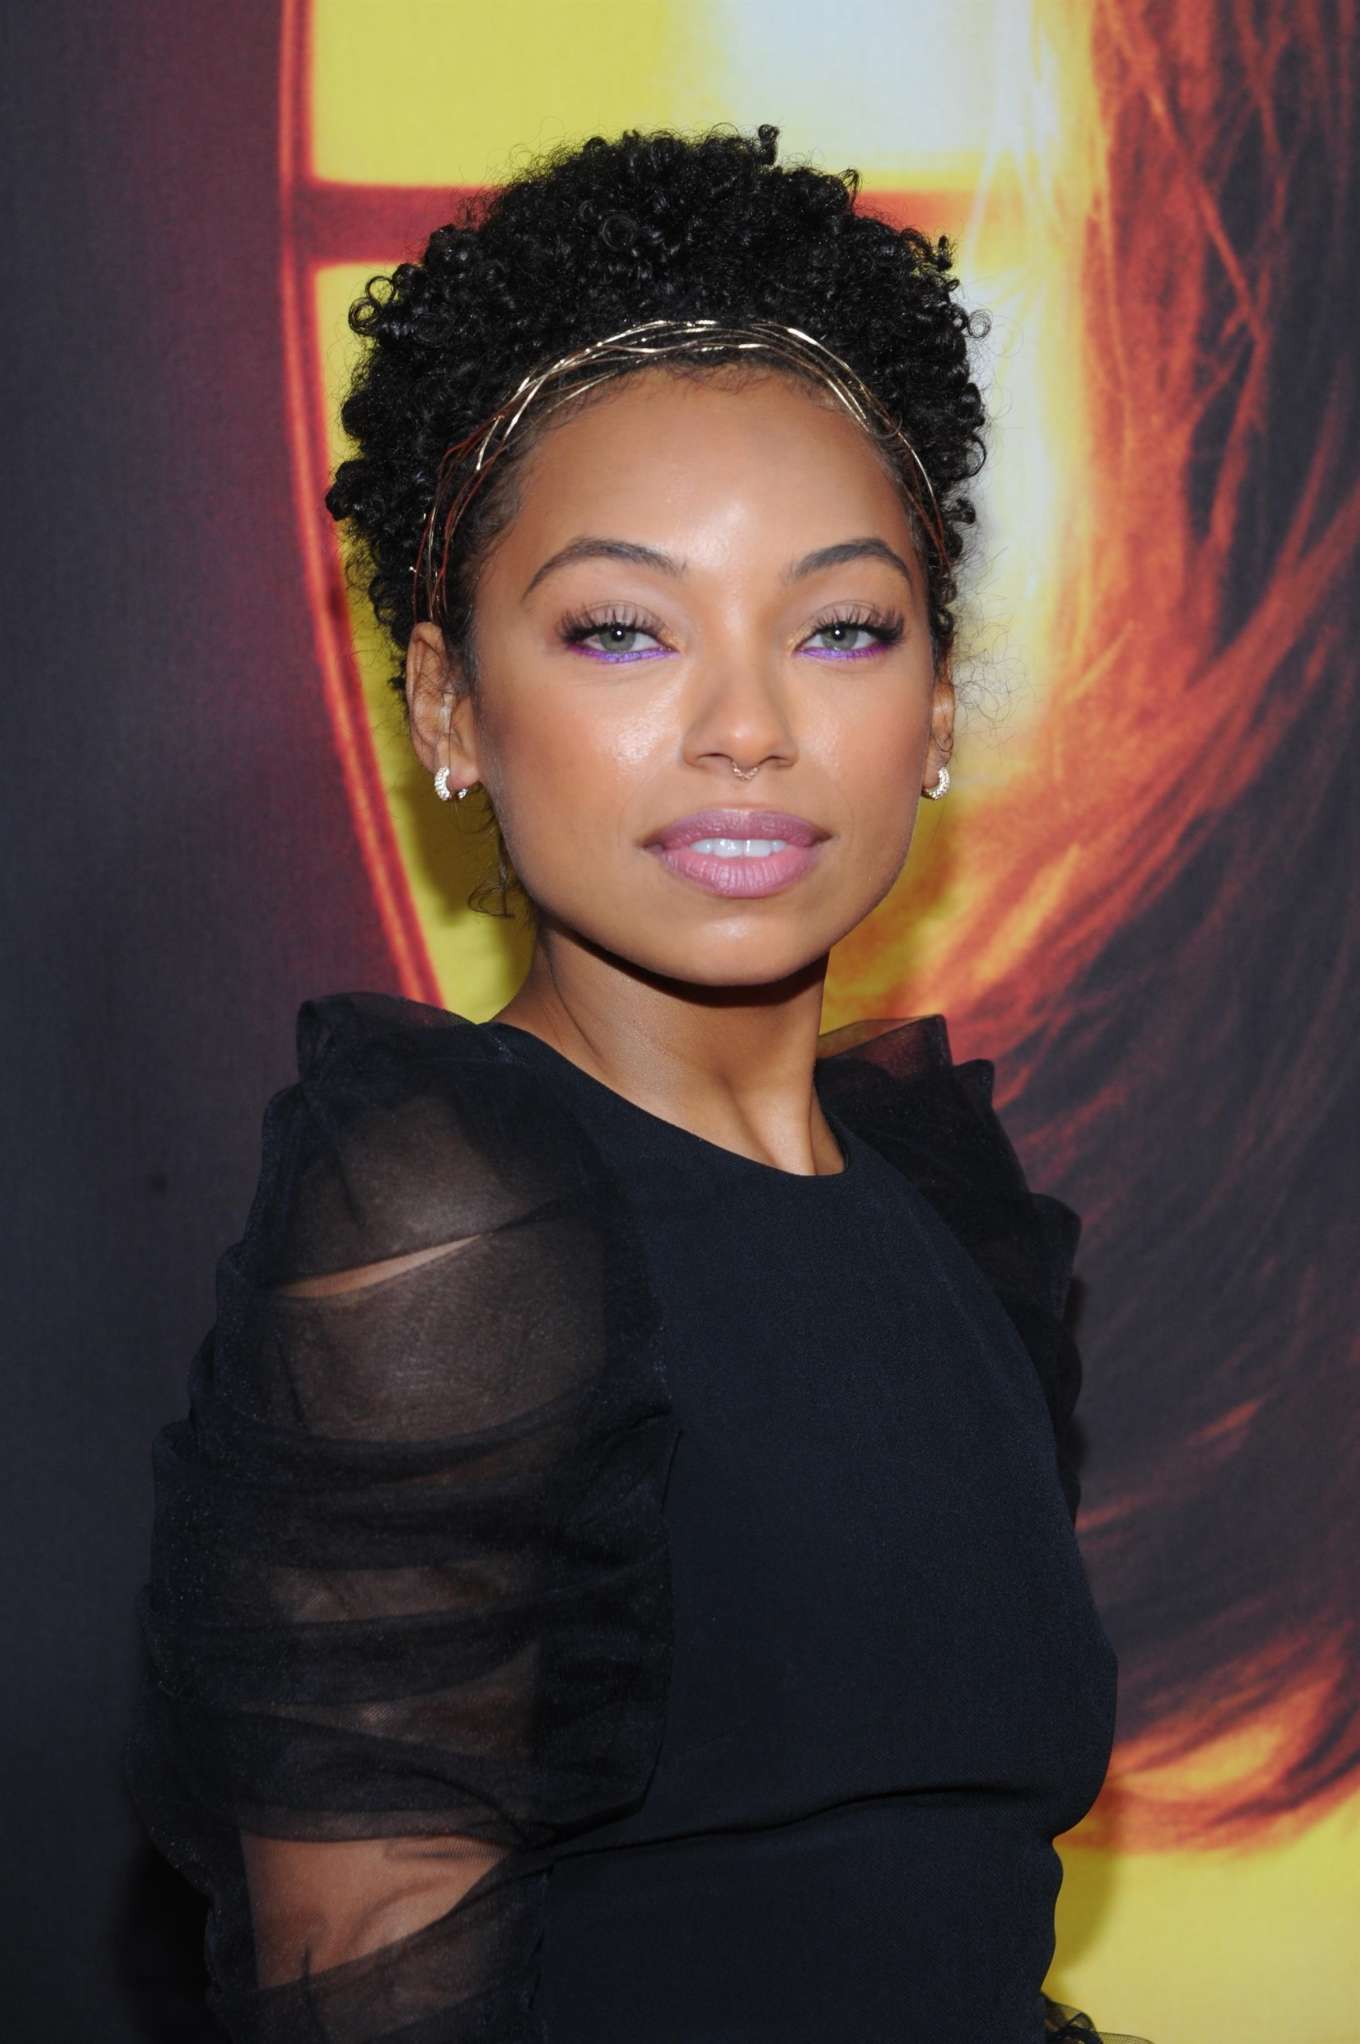 Logan Browning â€“ â€˜The Perfectionâ€™ Screening in New York City